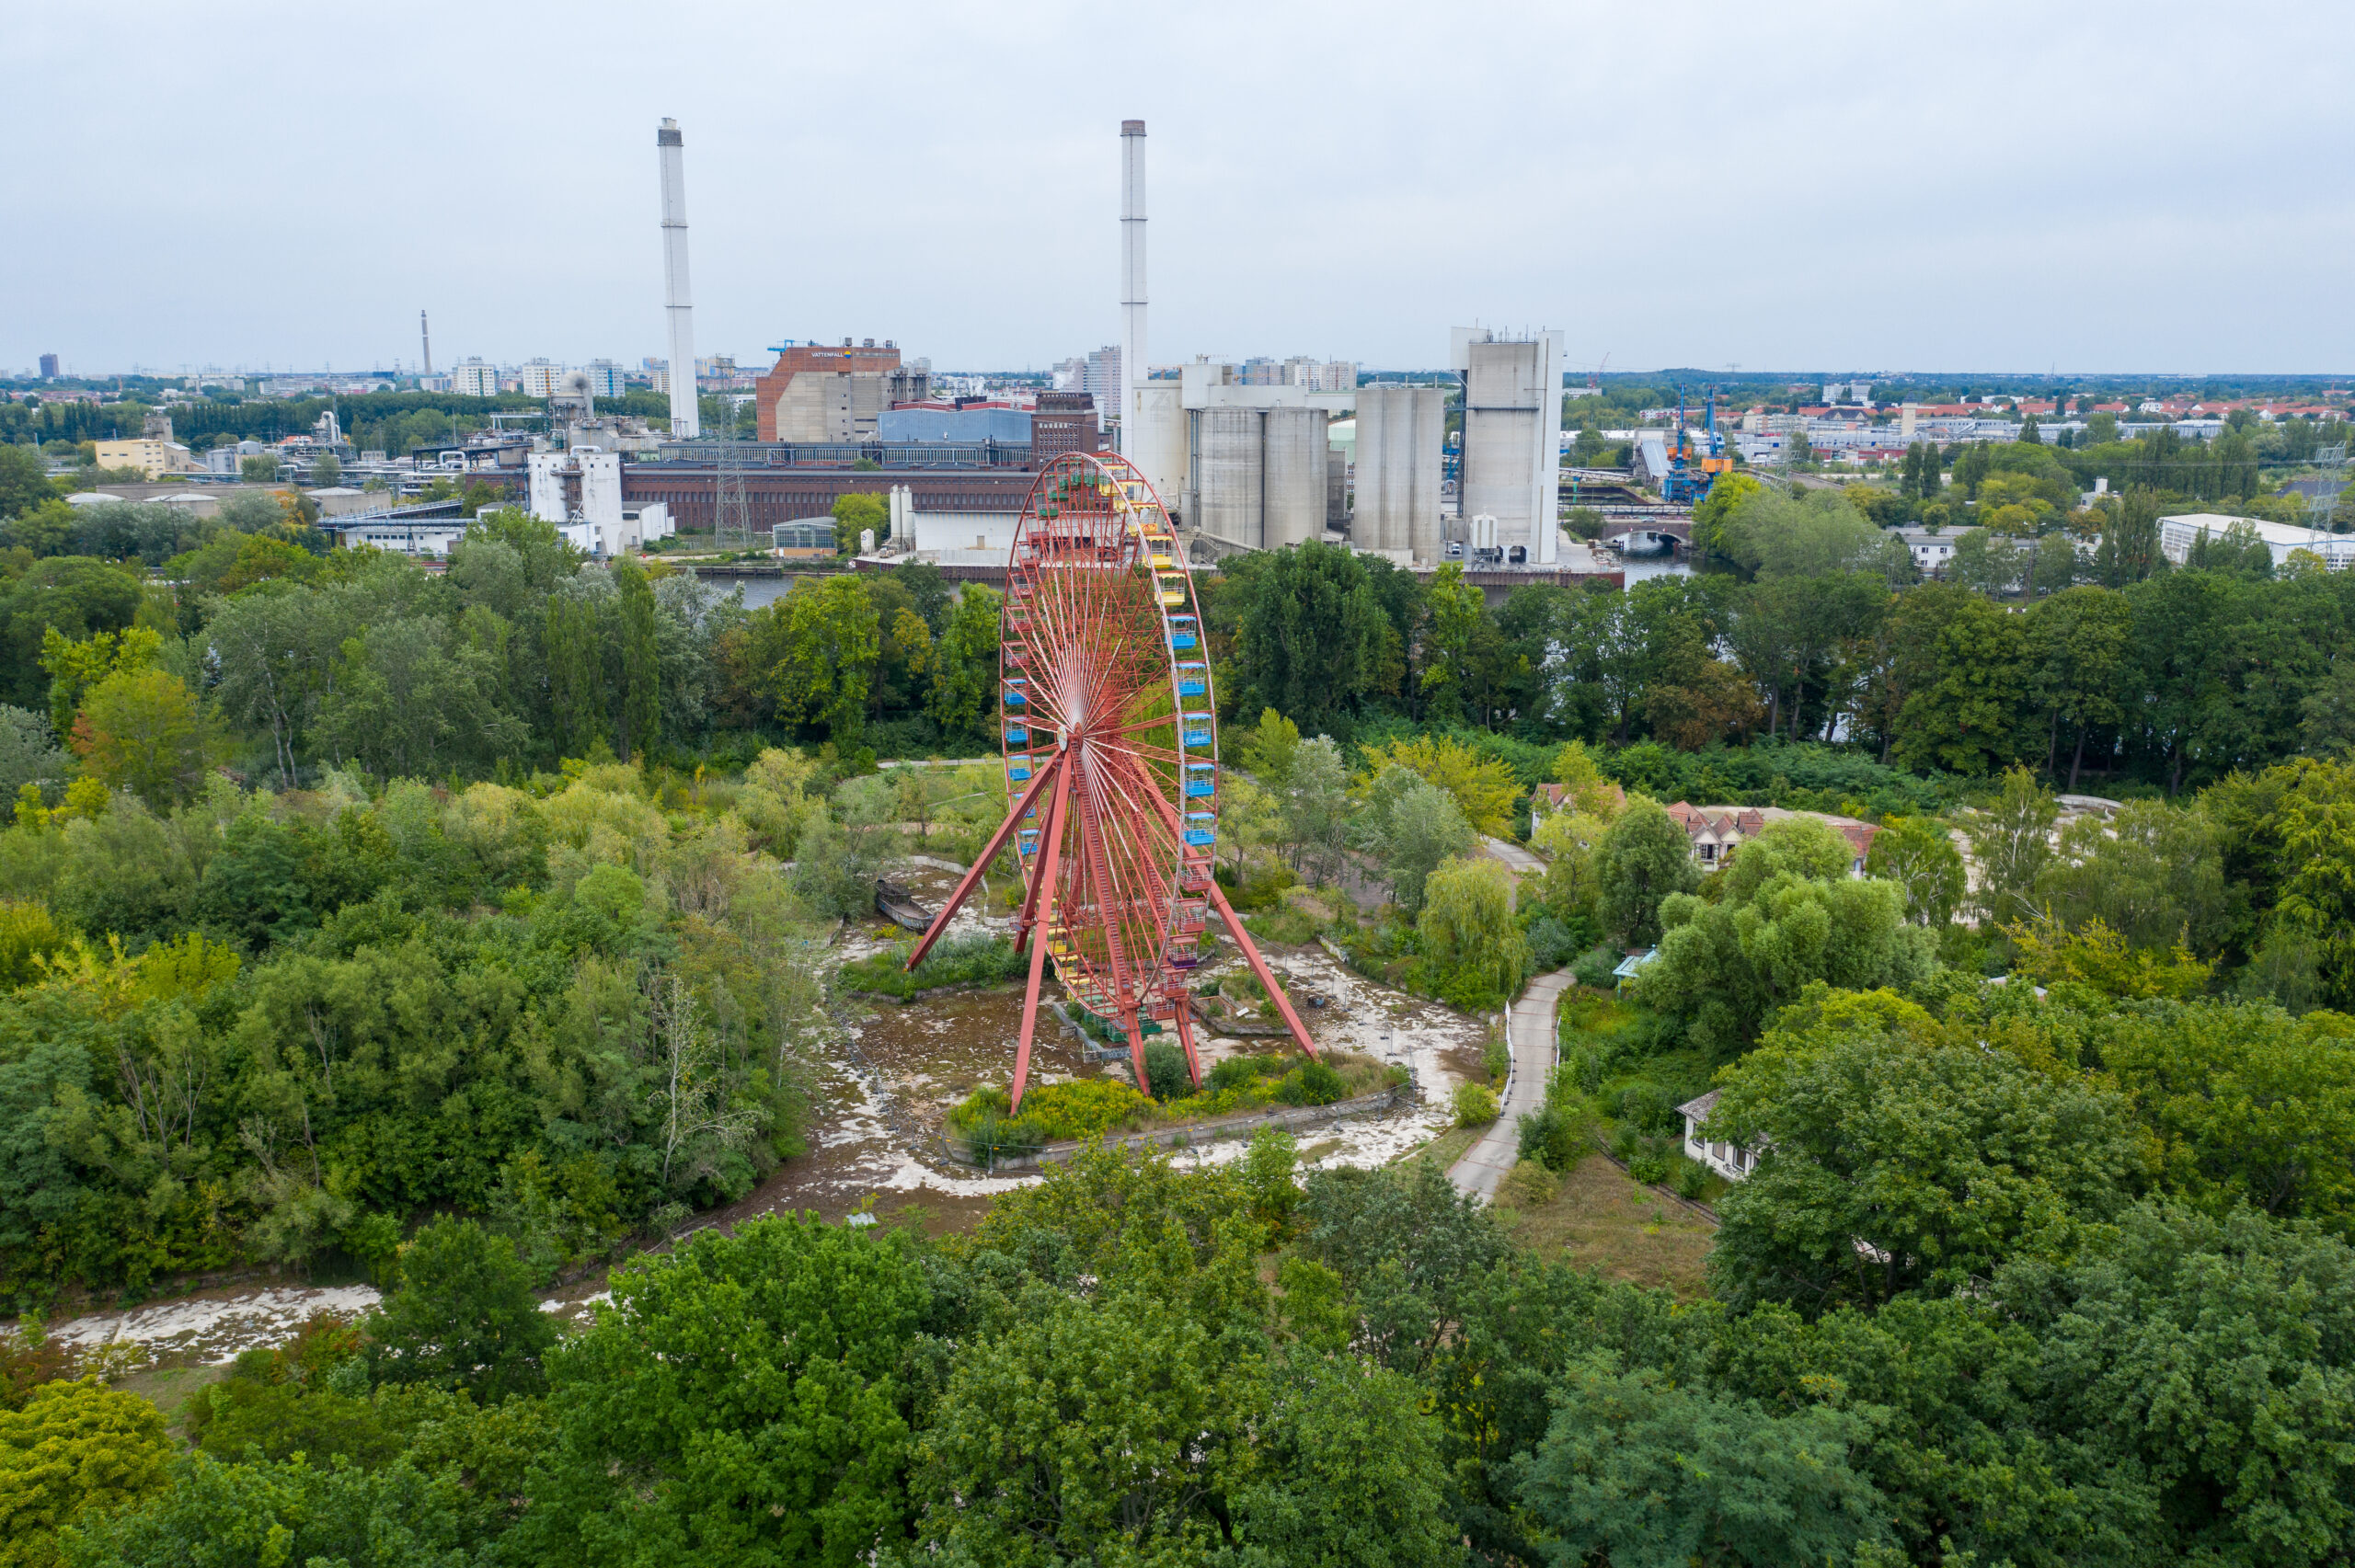 production-services-and-filming-in-berlin-ferris-wheel